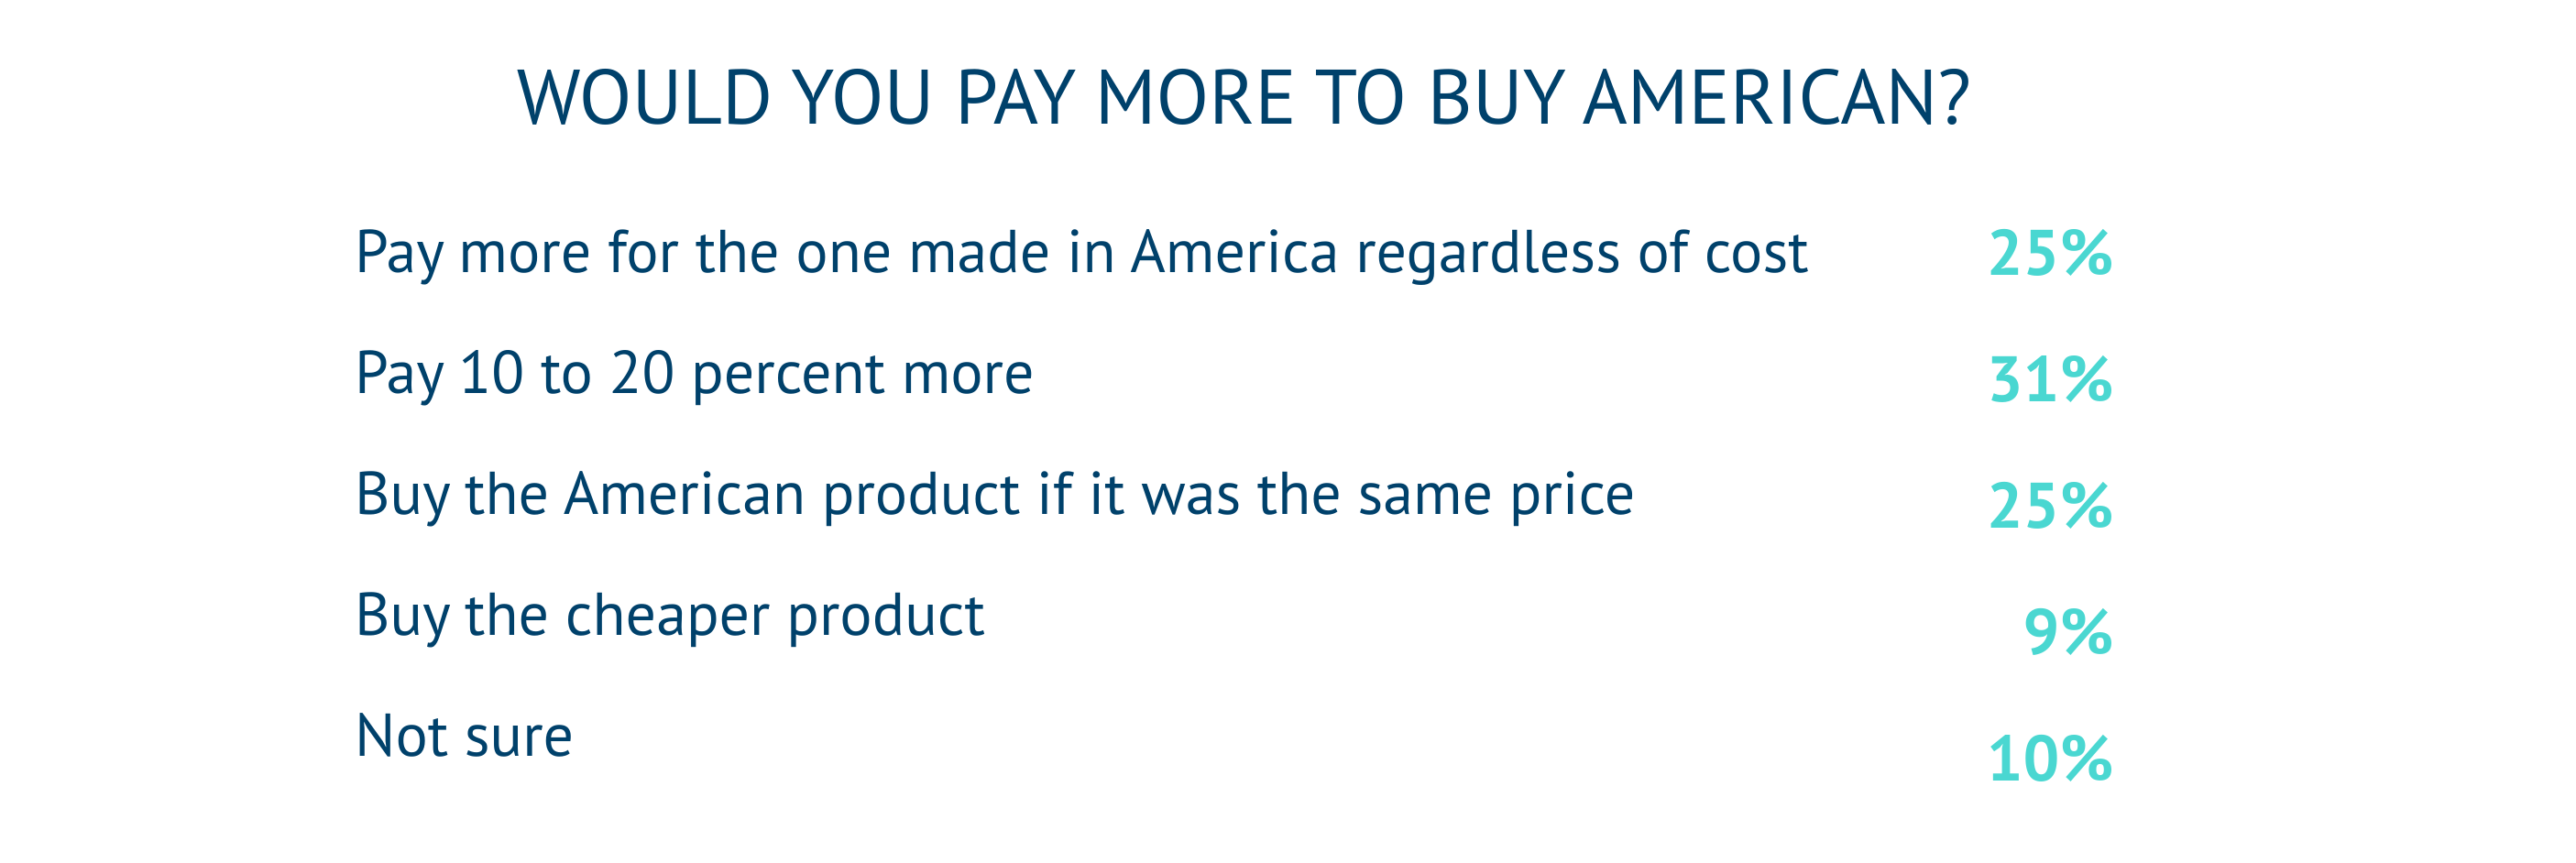 Q3 Would you pay more to Buy American